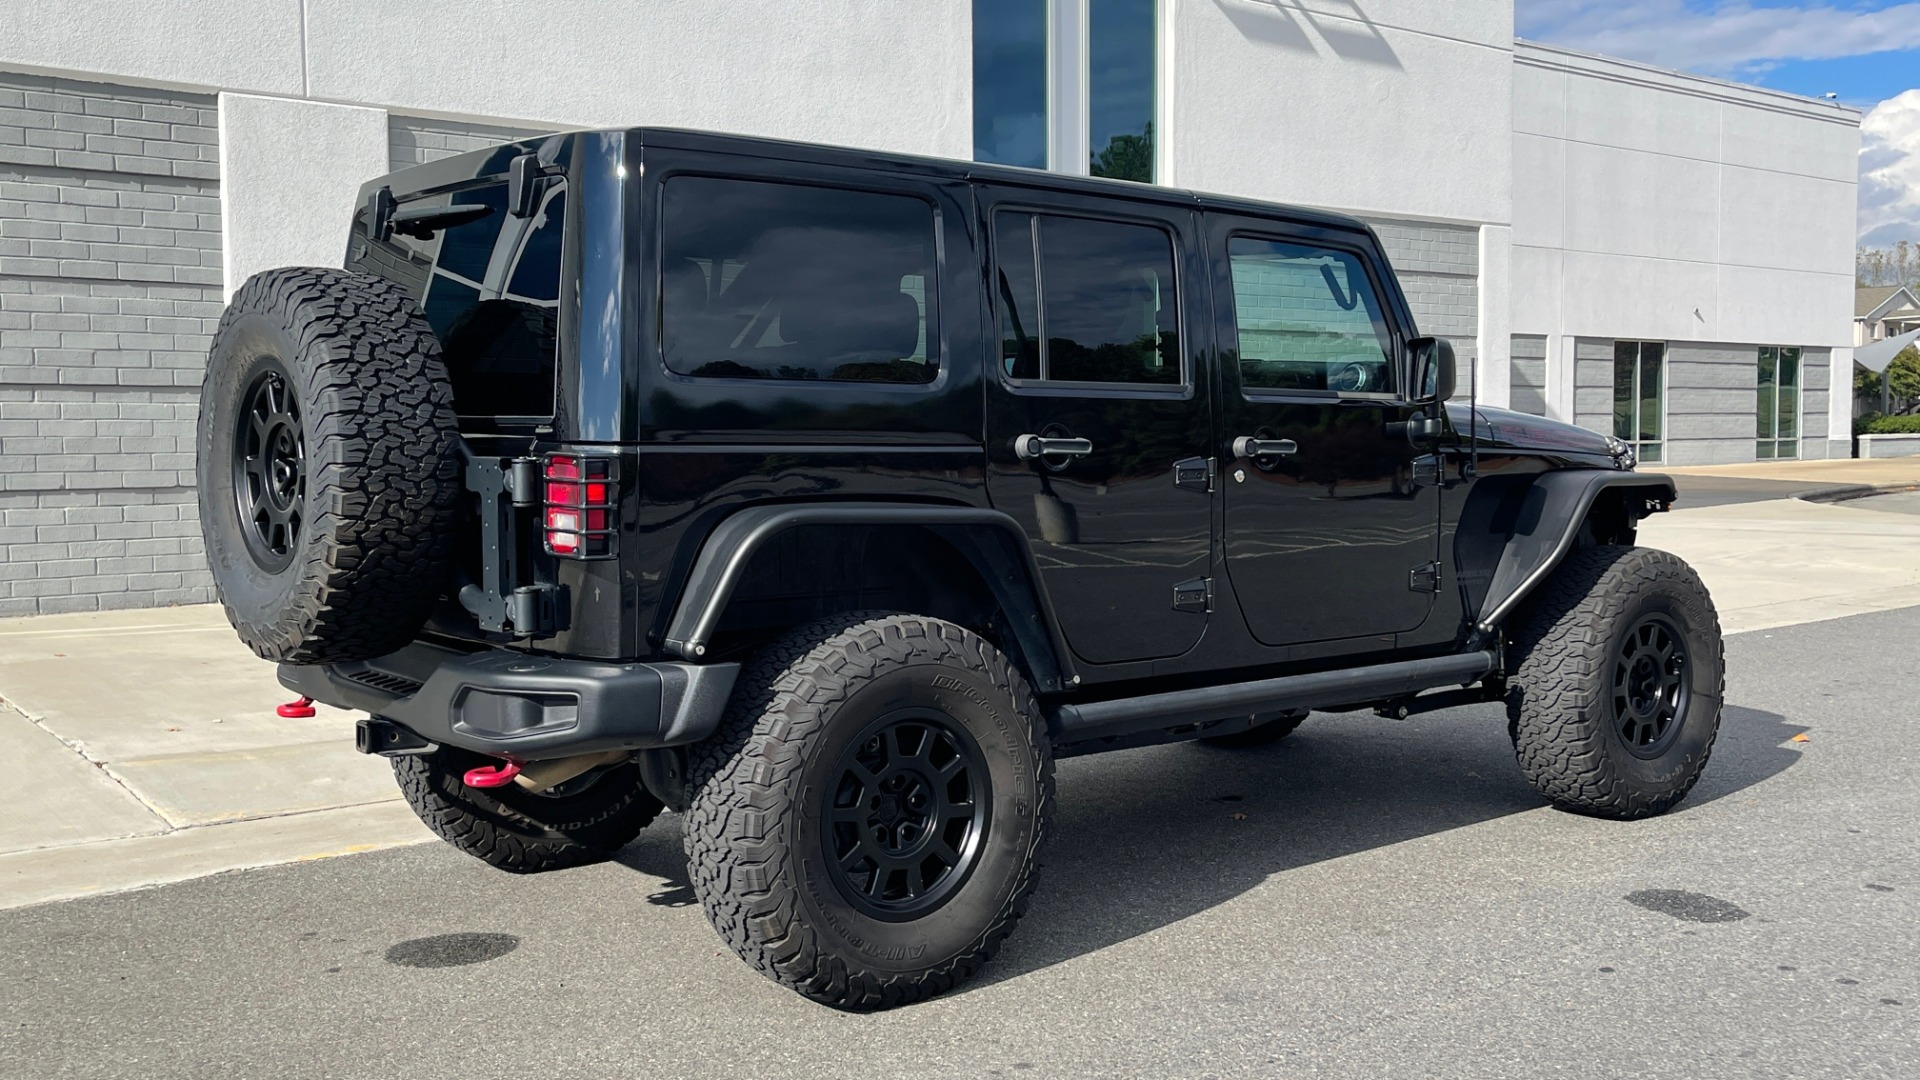 Used 2015 Jeep WRANGLER UNLIMITED RUBICON HARD ROCK 4X4 / 3.6L / 5-SPD AUTO / FREEDOM TOP for sale Sold at Formula Imports in Charlotte NC 28227 7